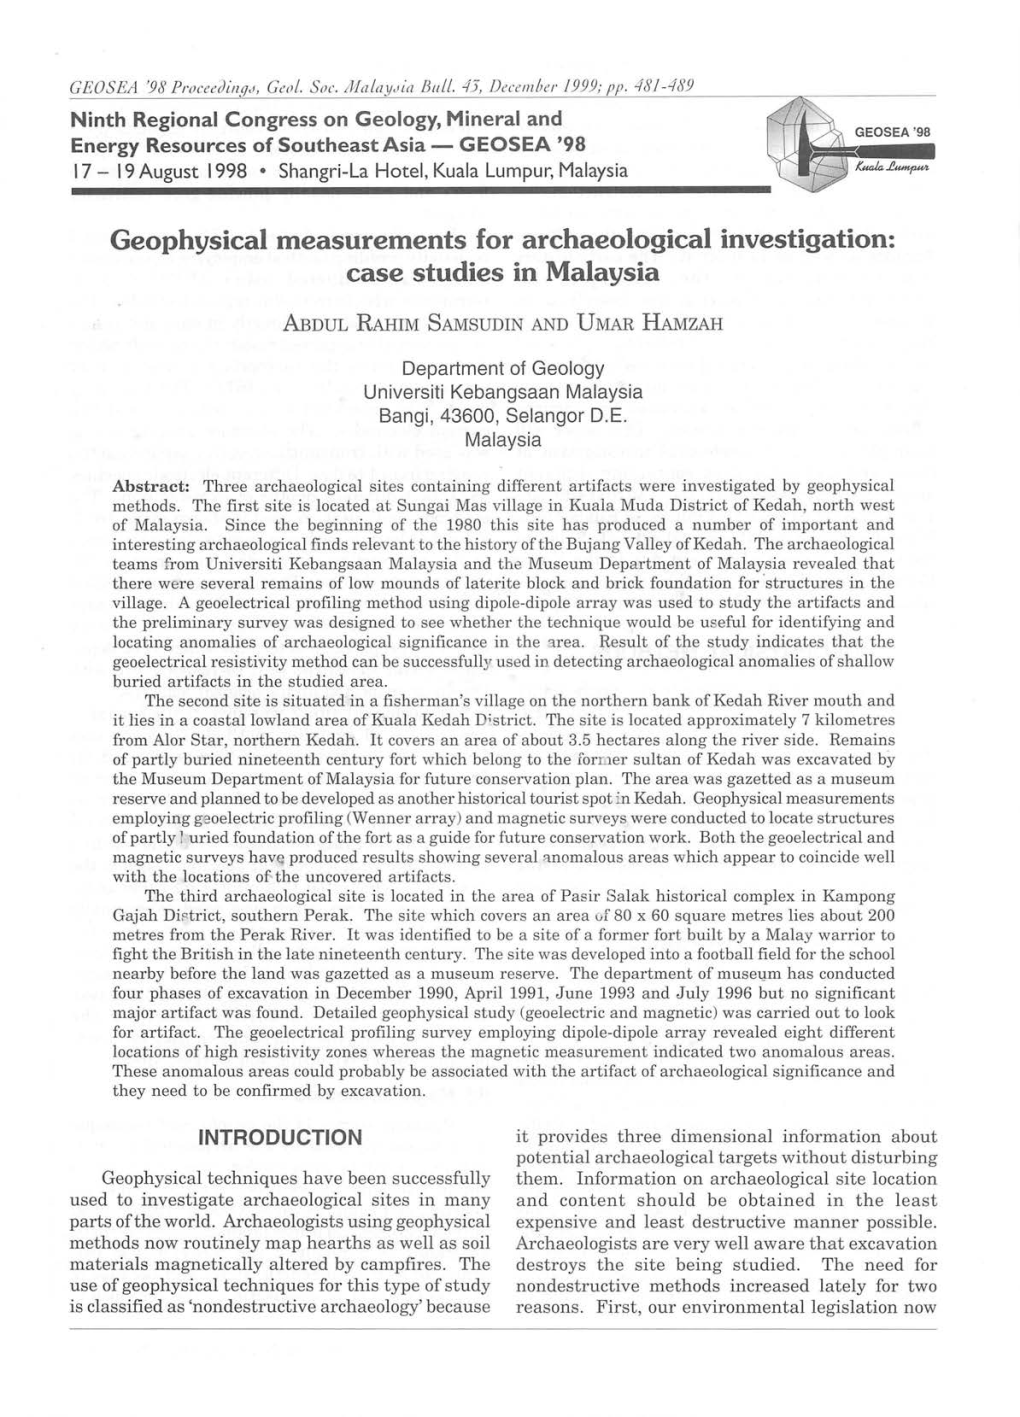 Geophysical Measurements for Archaeological Investigation: Case Studies in Malaysia